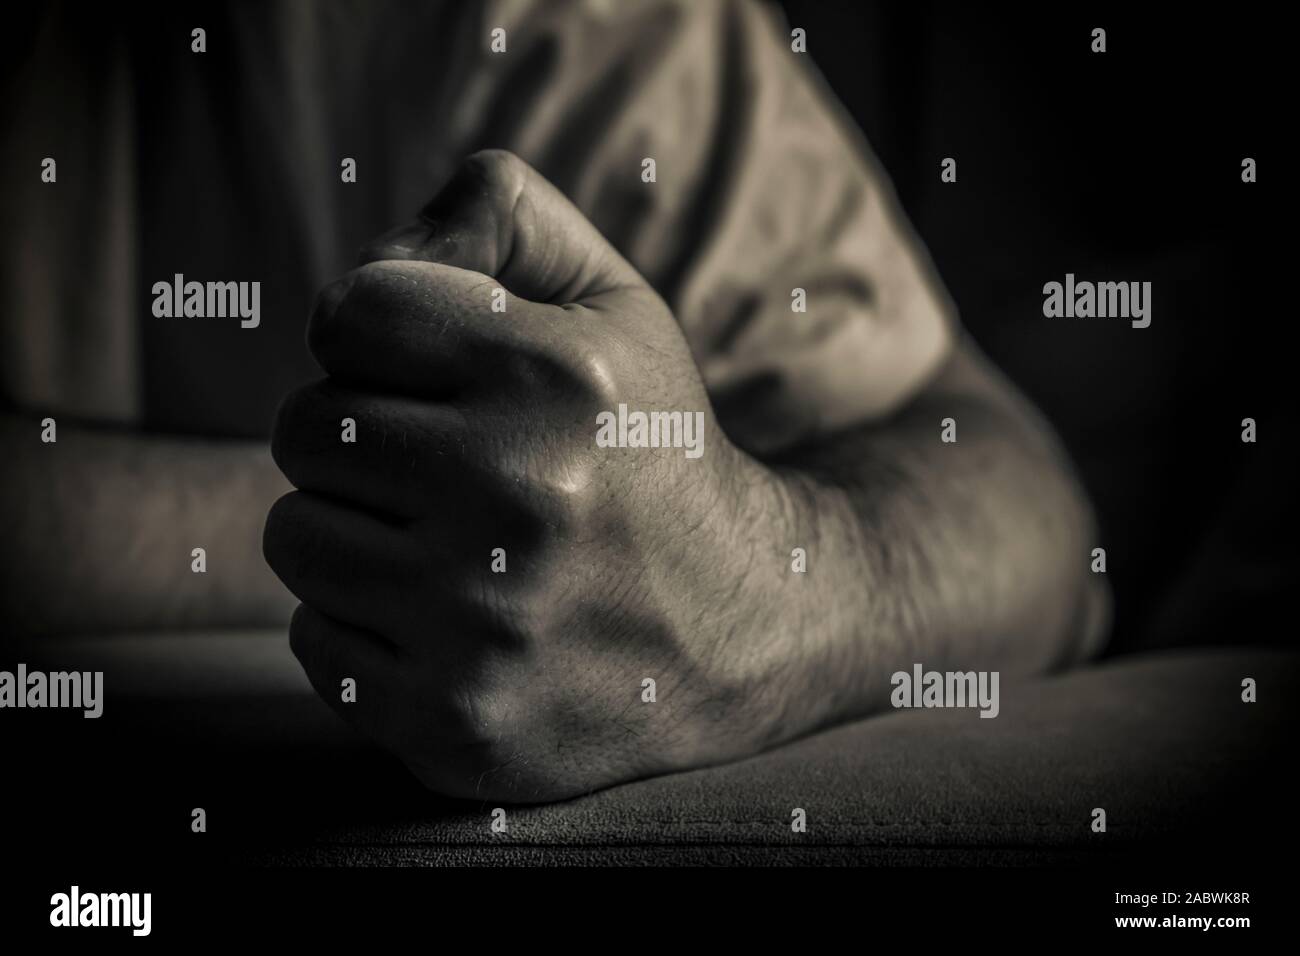 A close-up of a man holding his fist clenched in black and white Stock Photo